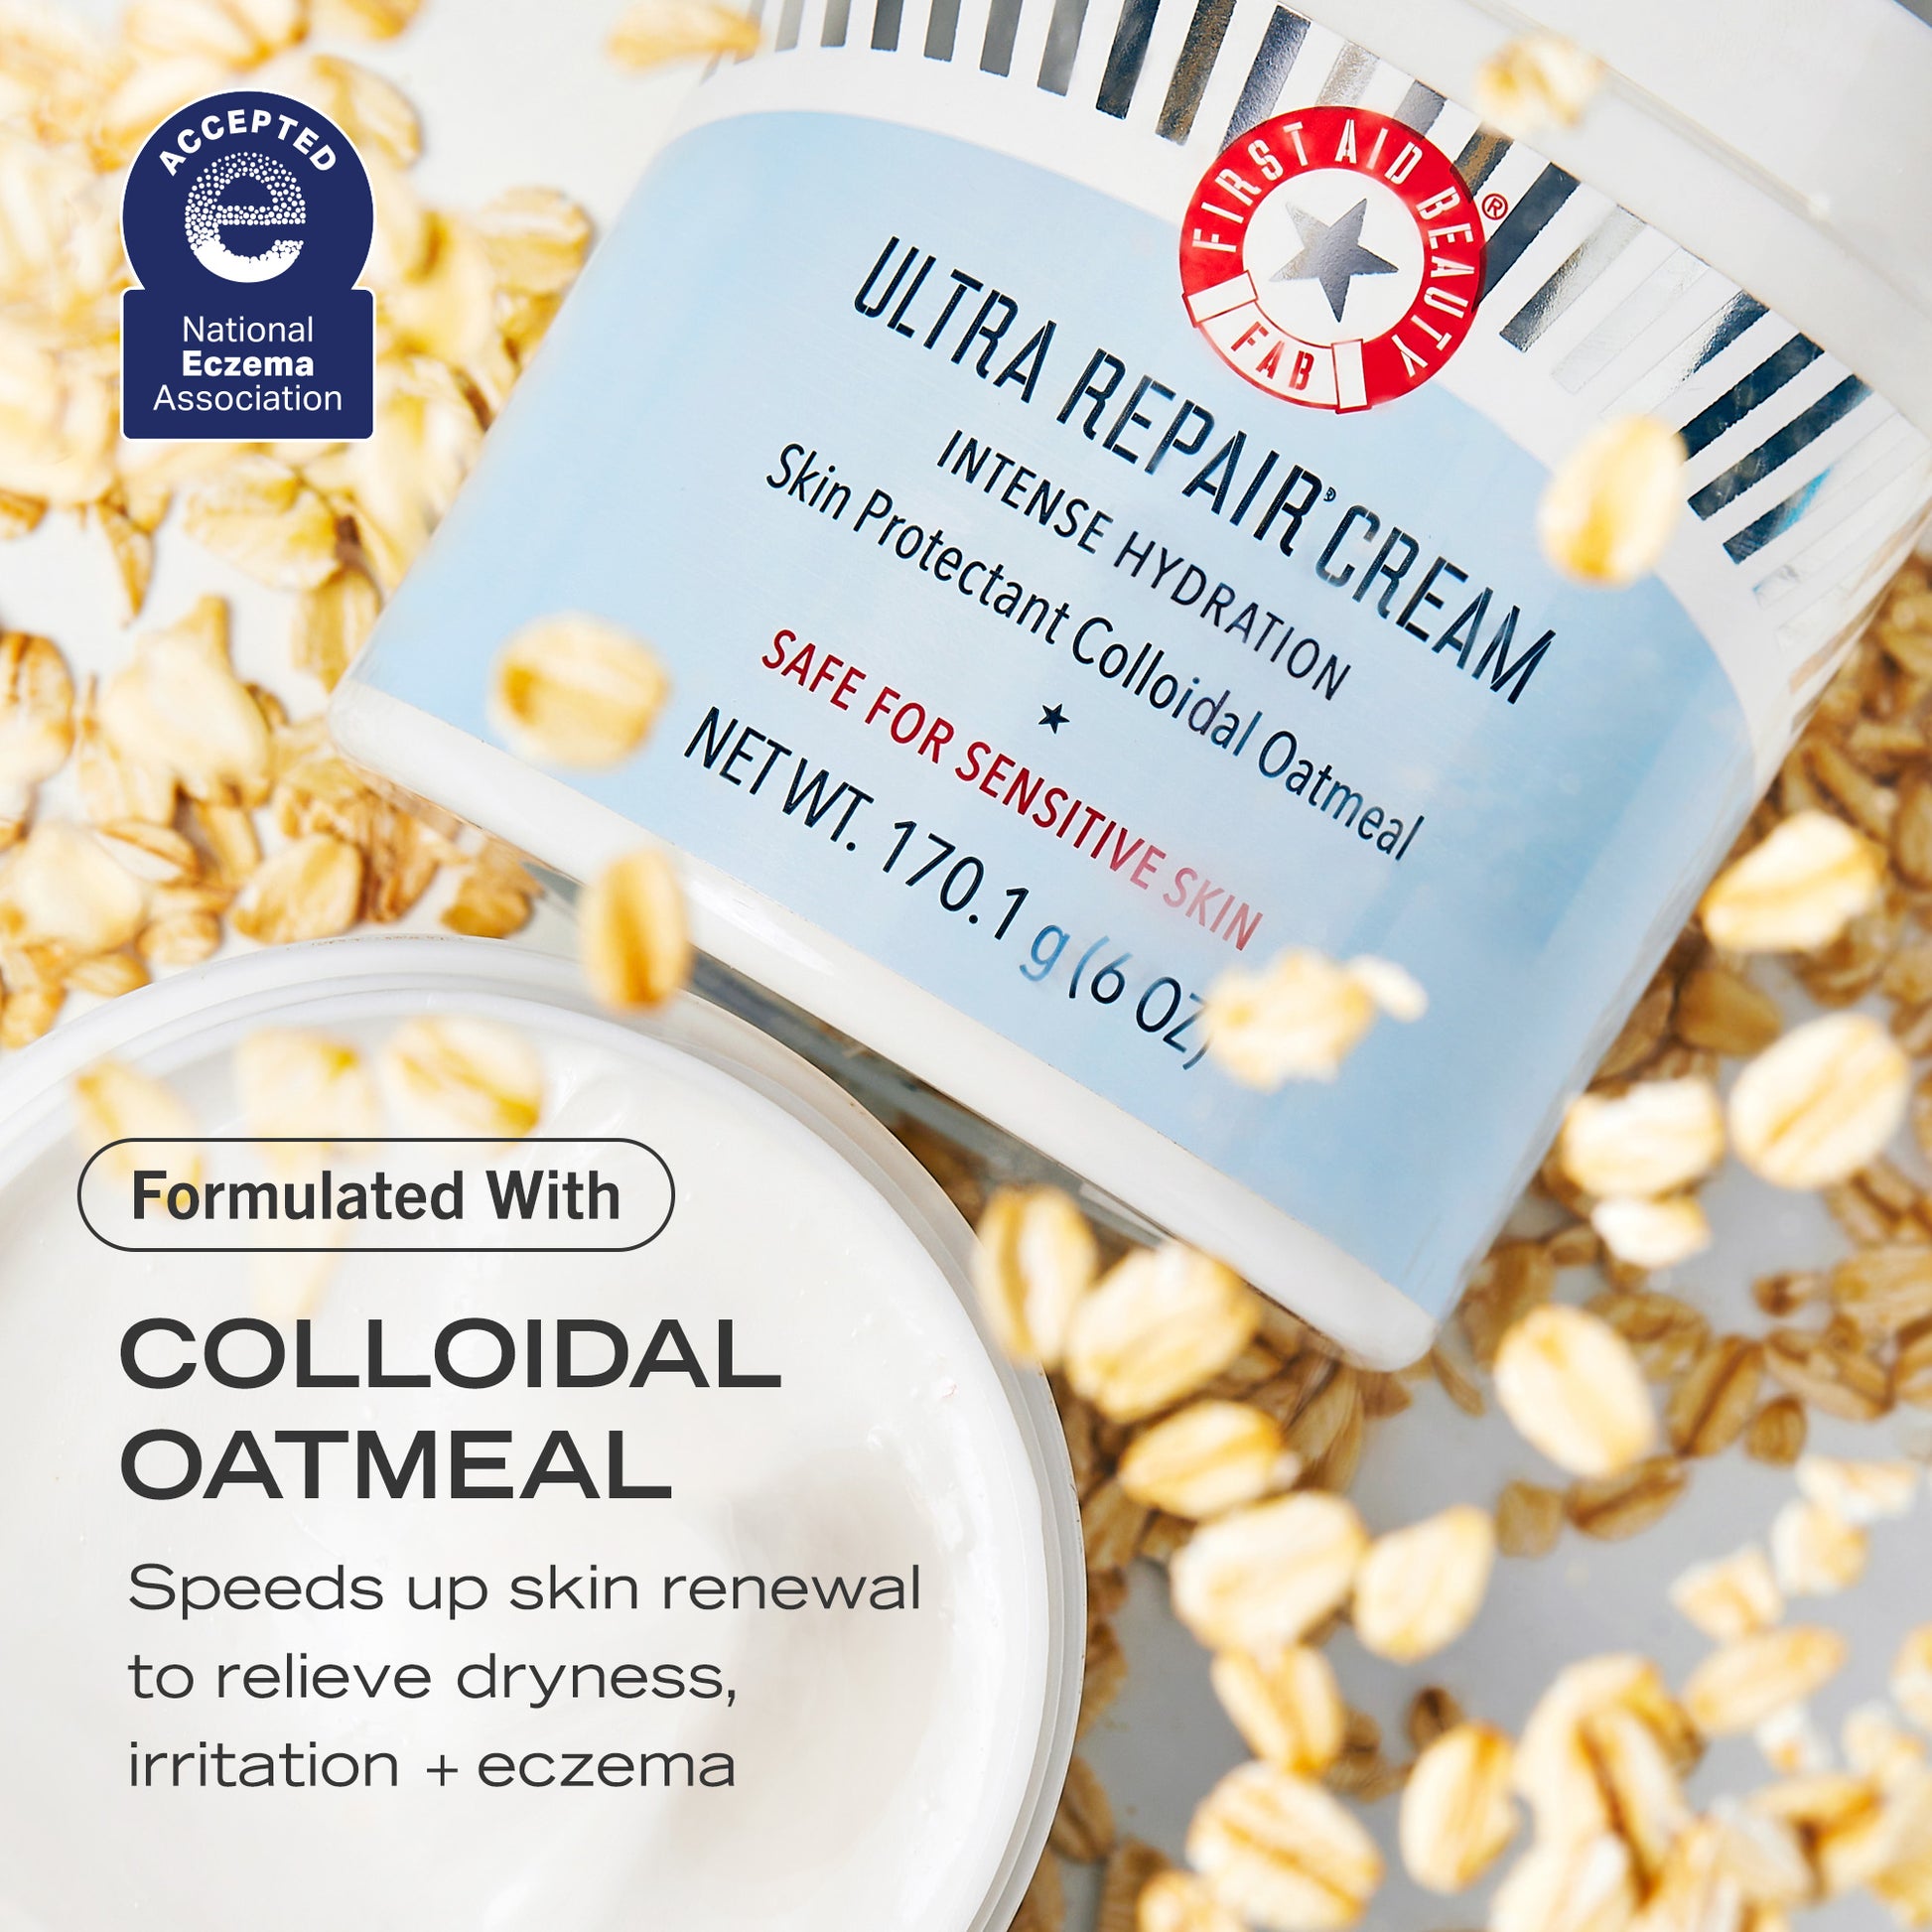 Jar of Ultra Repair Cream with oats.  Formulated With Colloidal Oatmeal. Speeds up skin renewal to relieve dryness, irritation + eczema.